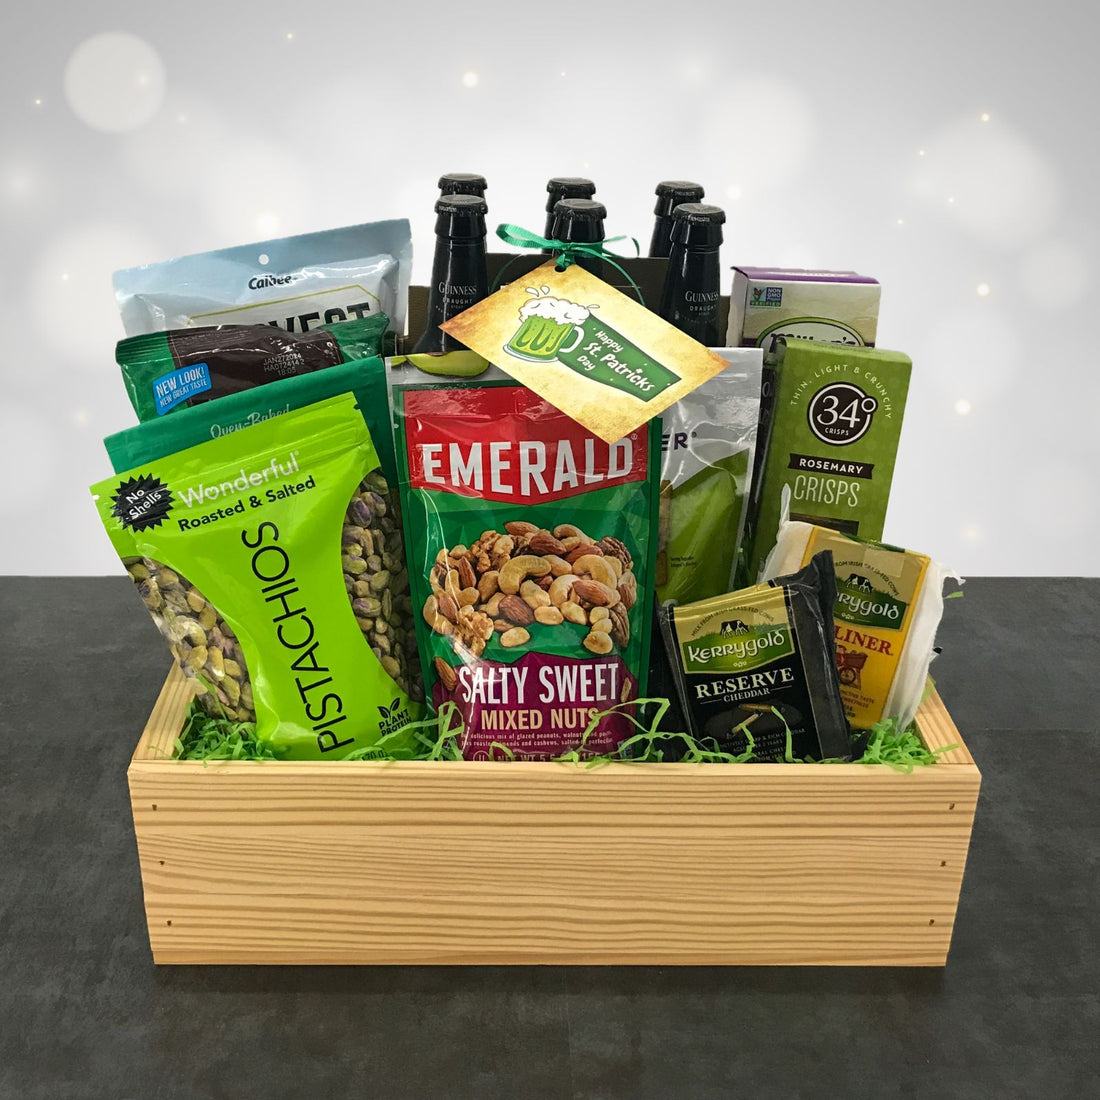 Wooden crates in seasonal marketing: Elevate your brand all year round